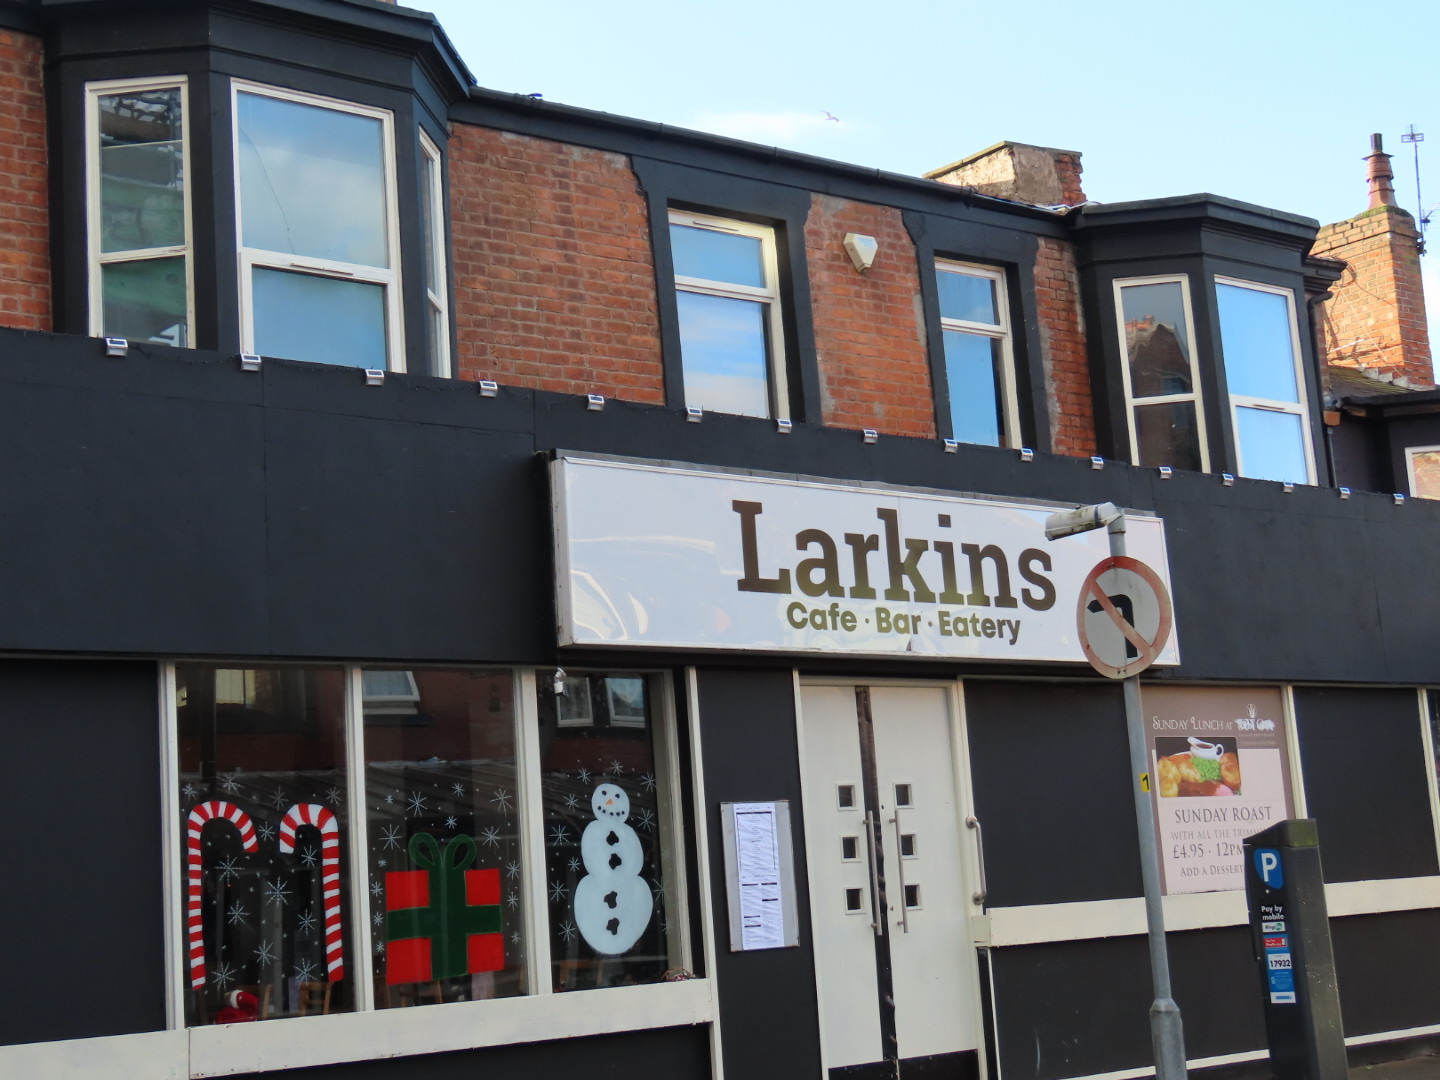 Larkins Cafe Bar and Eatery on Bold Street in Southport. Photo by Andrew Brown Media